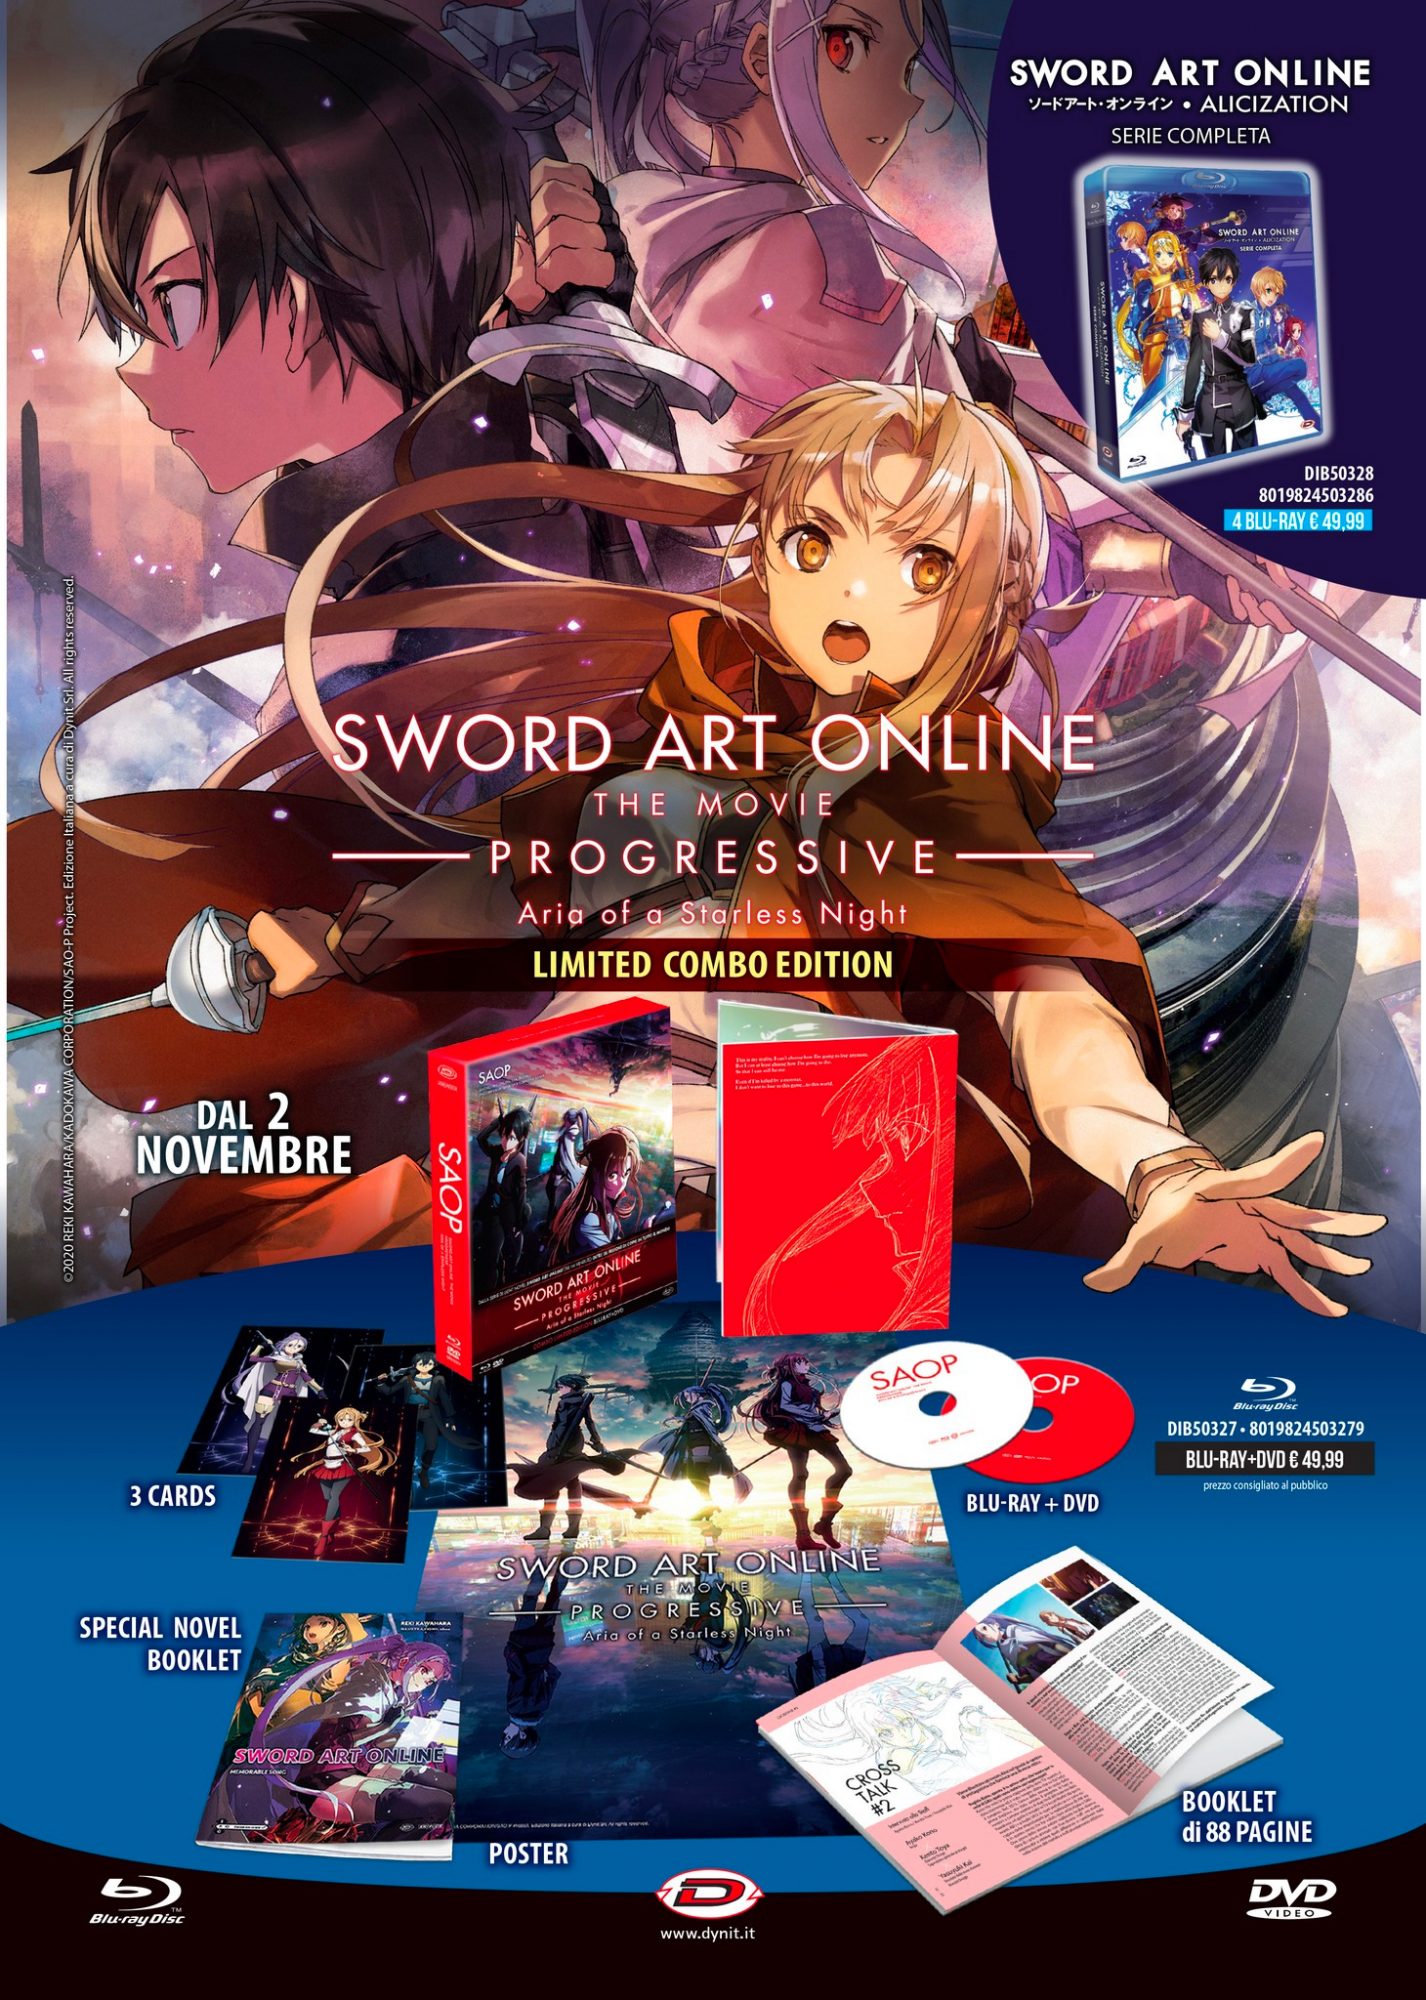 SWORD ART ONLINE Progressive: Aria of a Starless Night arrives on Blu-ray and DVD